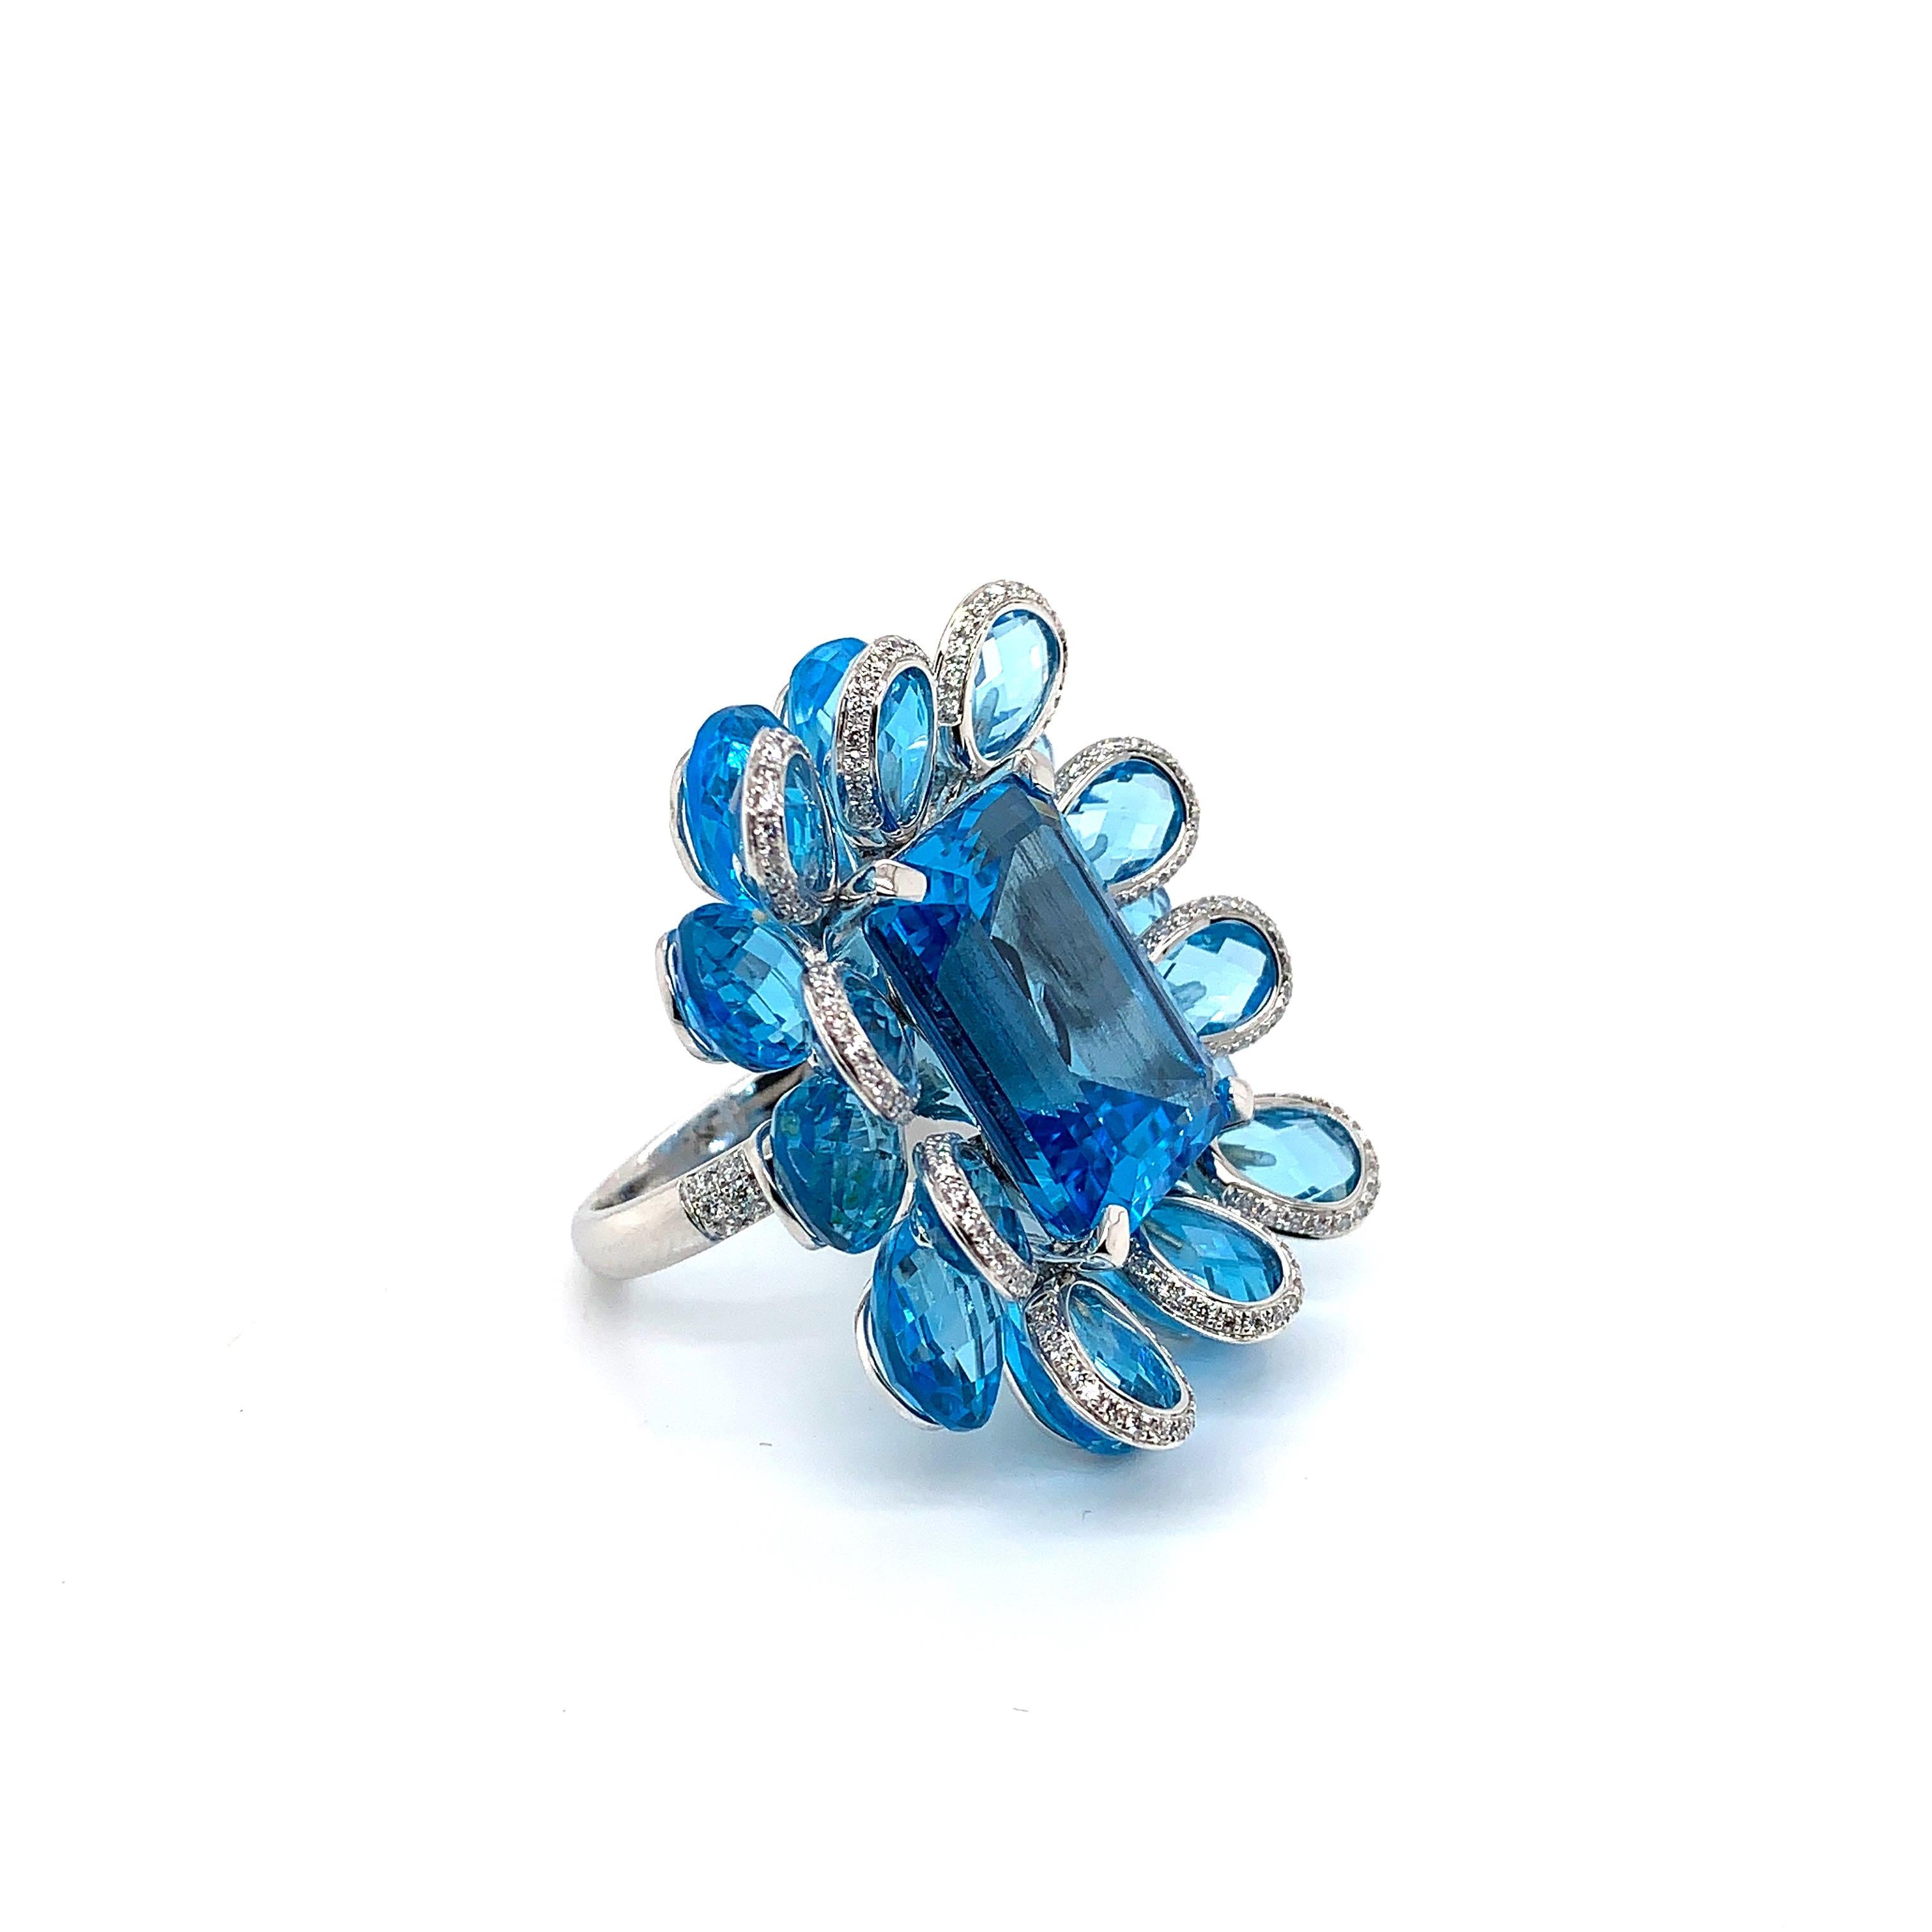 Women's 21.5 Carat Blue Topaz and Diamond Floral Ring in 18 Karat White Gold For Sale